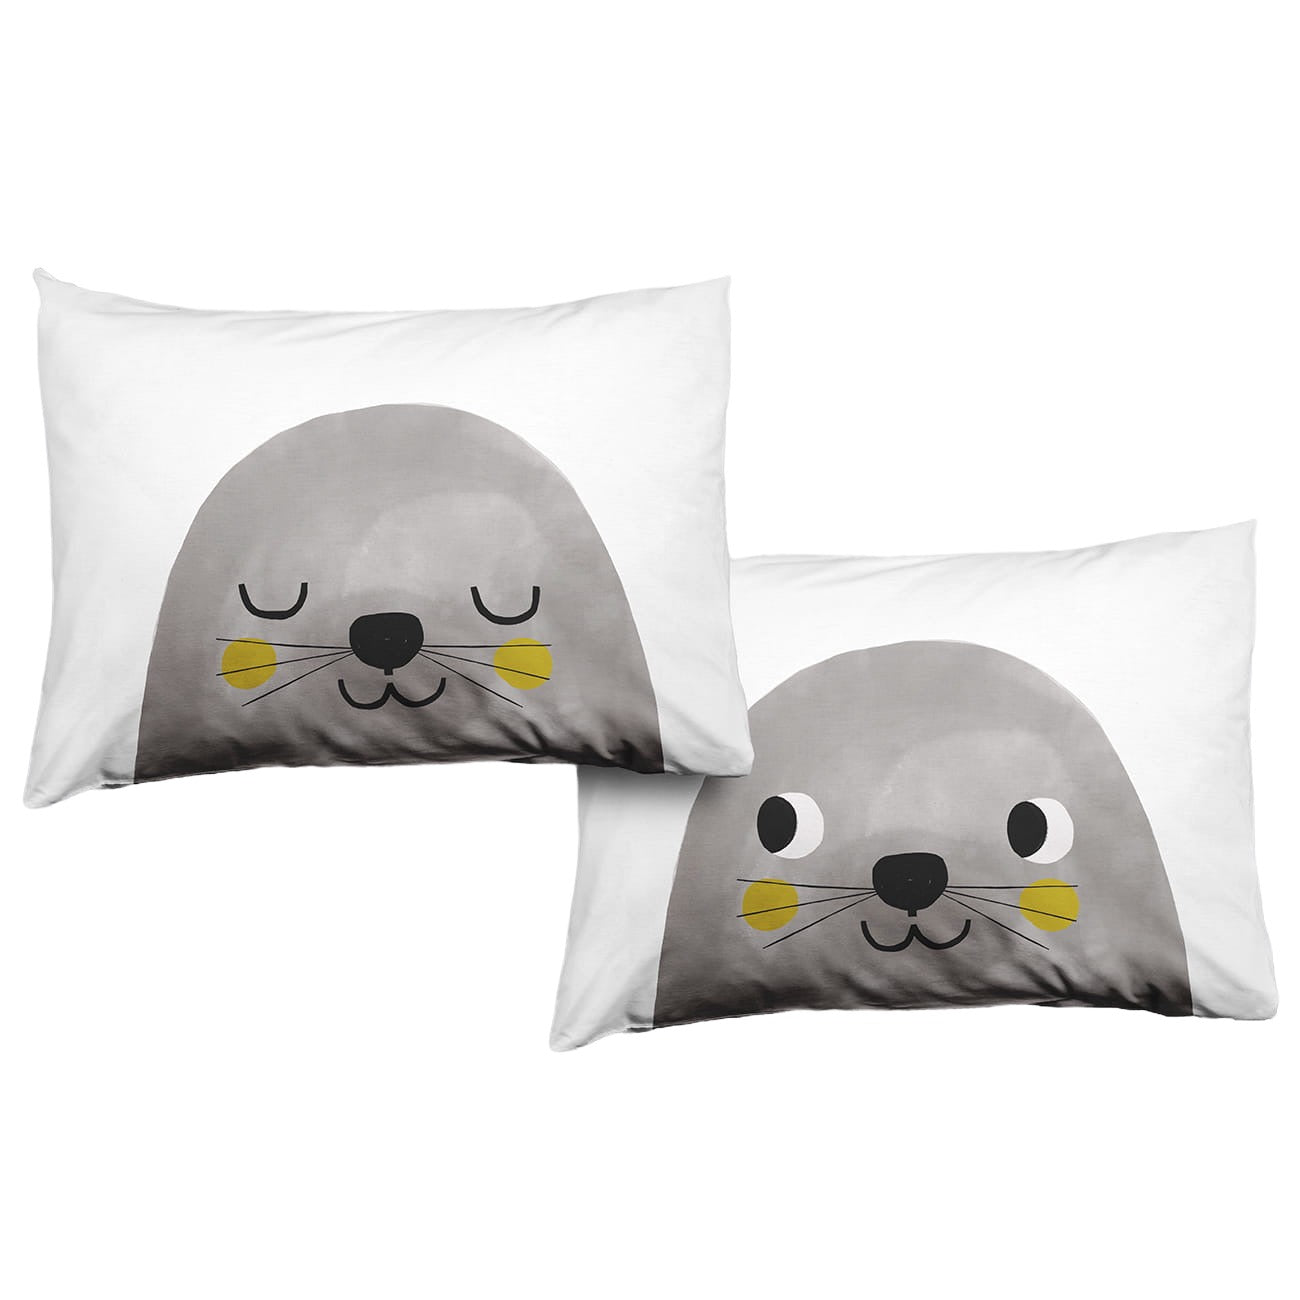 2-pack Seal Standard Size Pillowcases